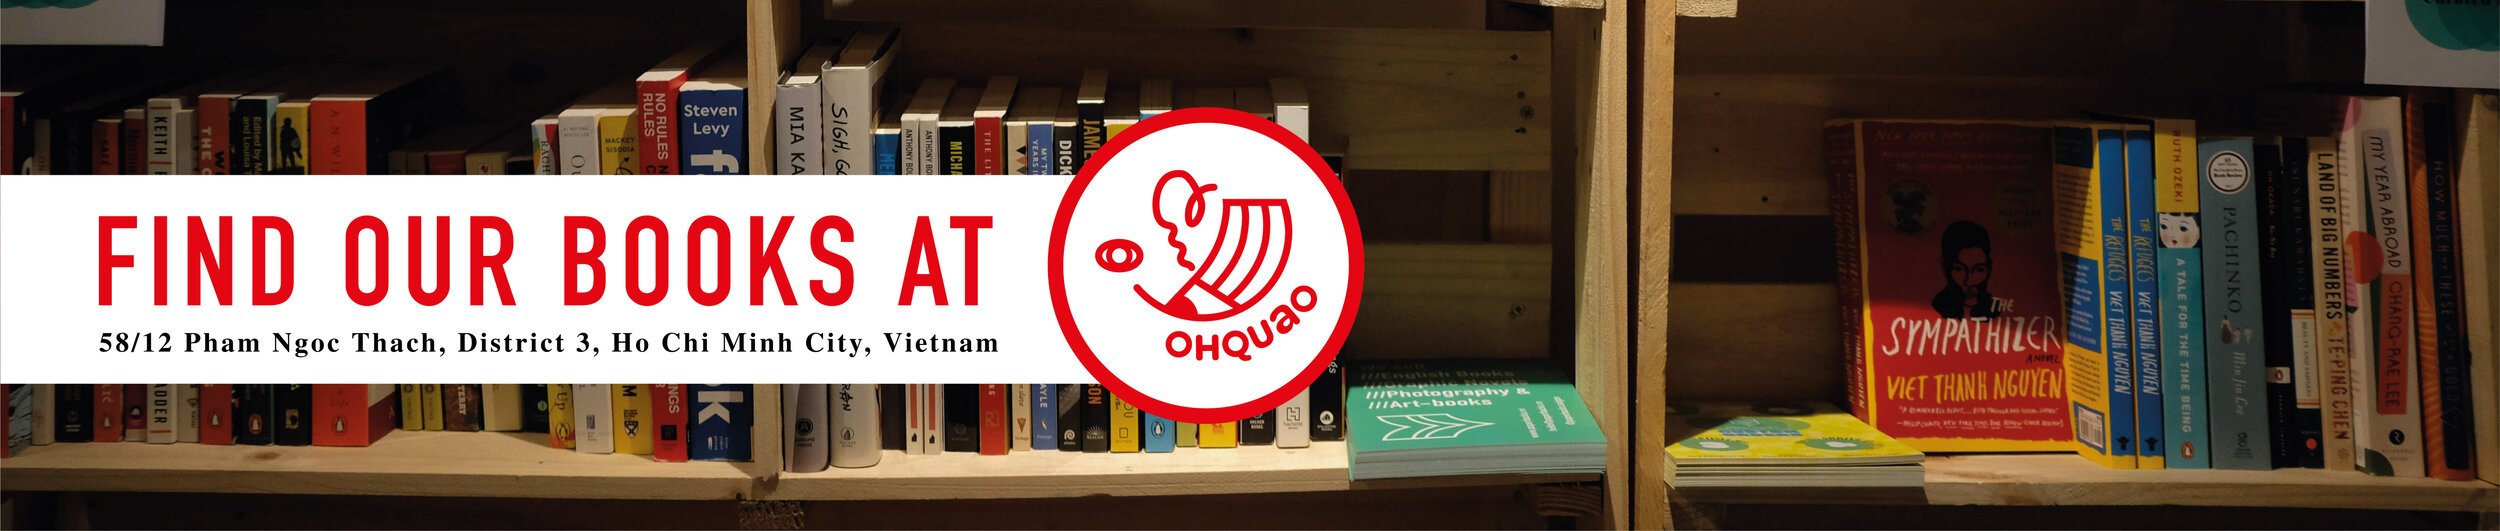 FIND OUR BOOKS AT OHQUAO-04.jpg